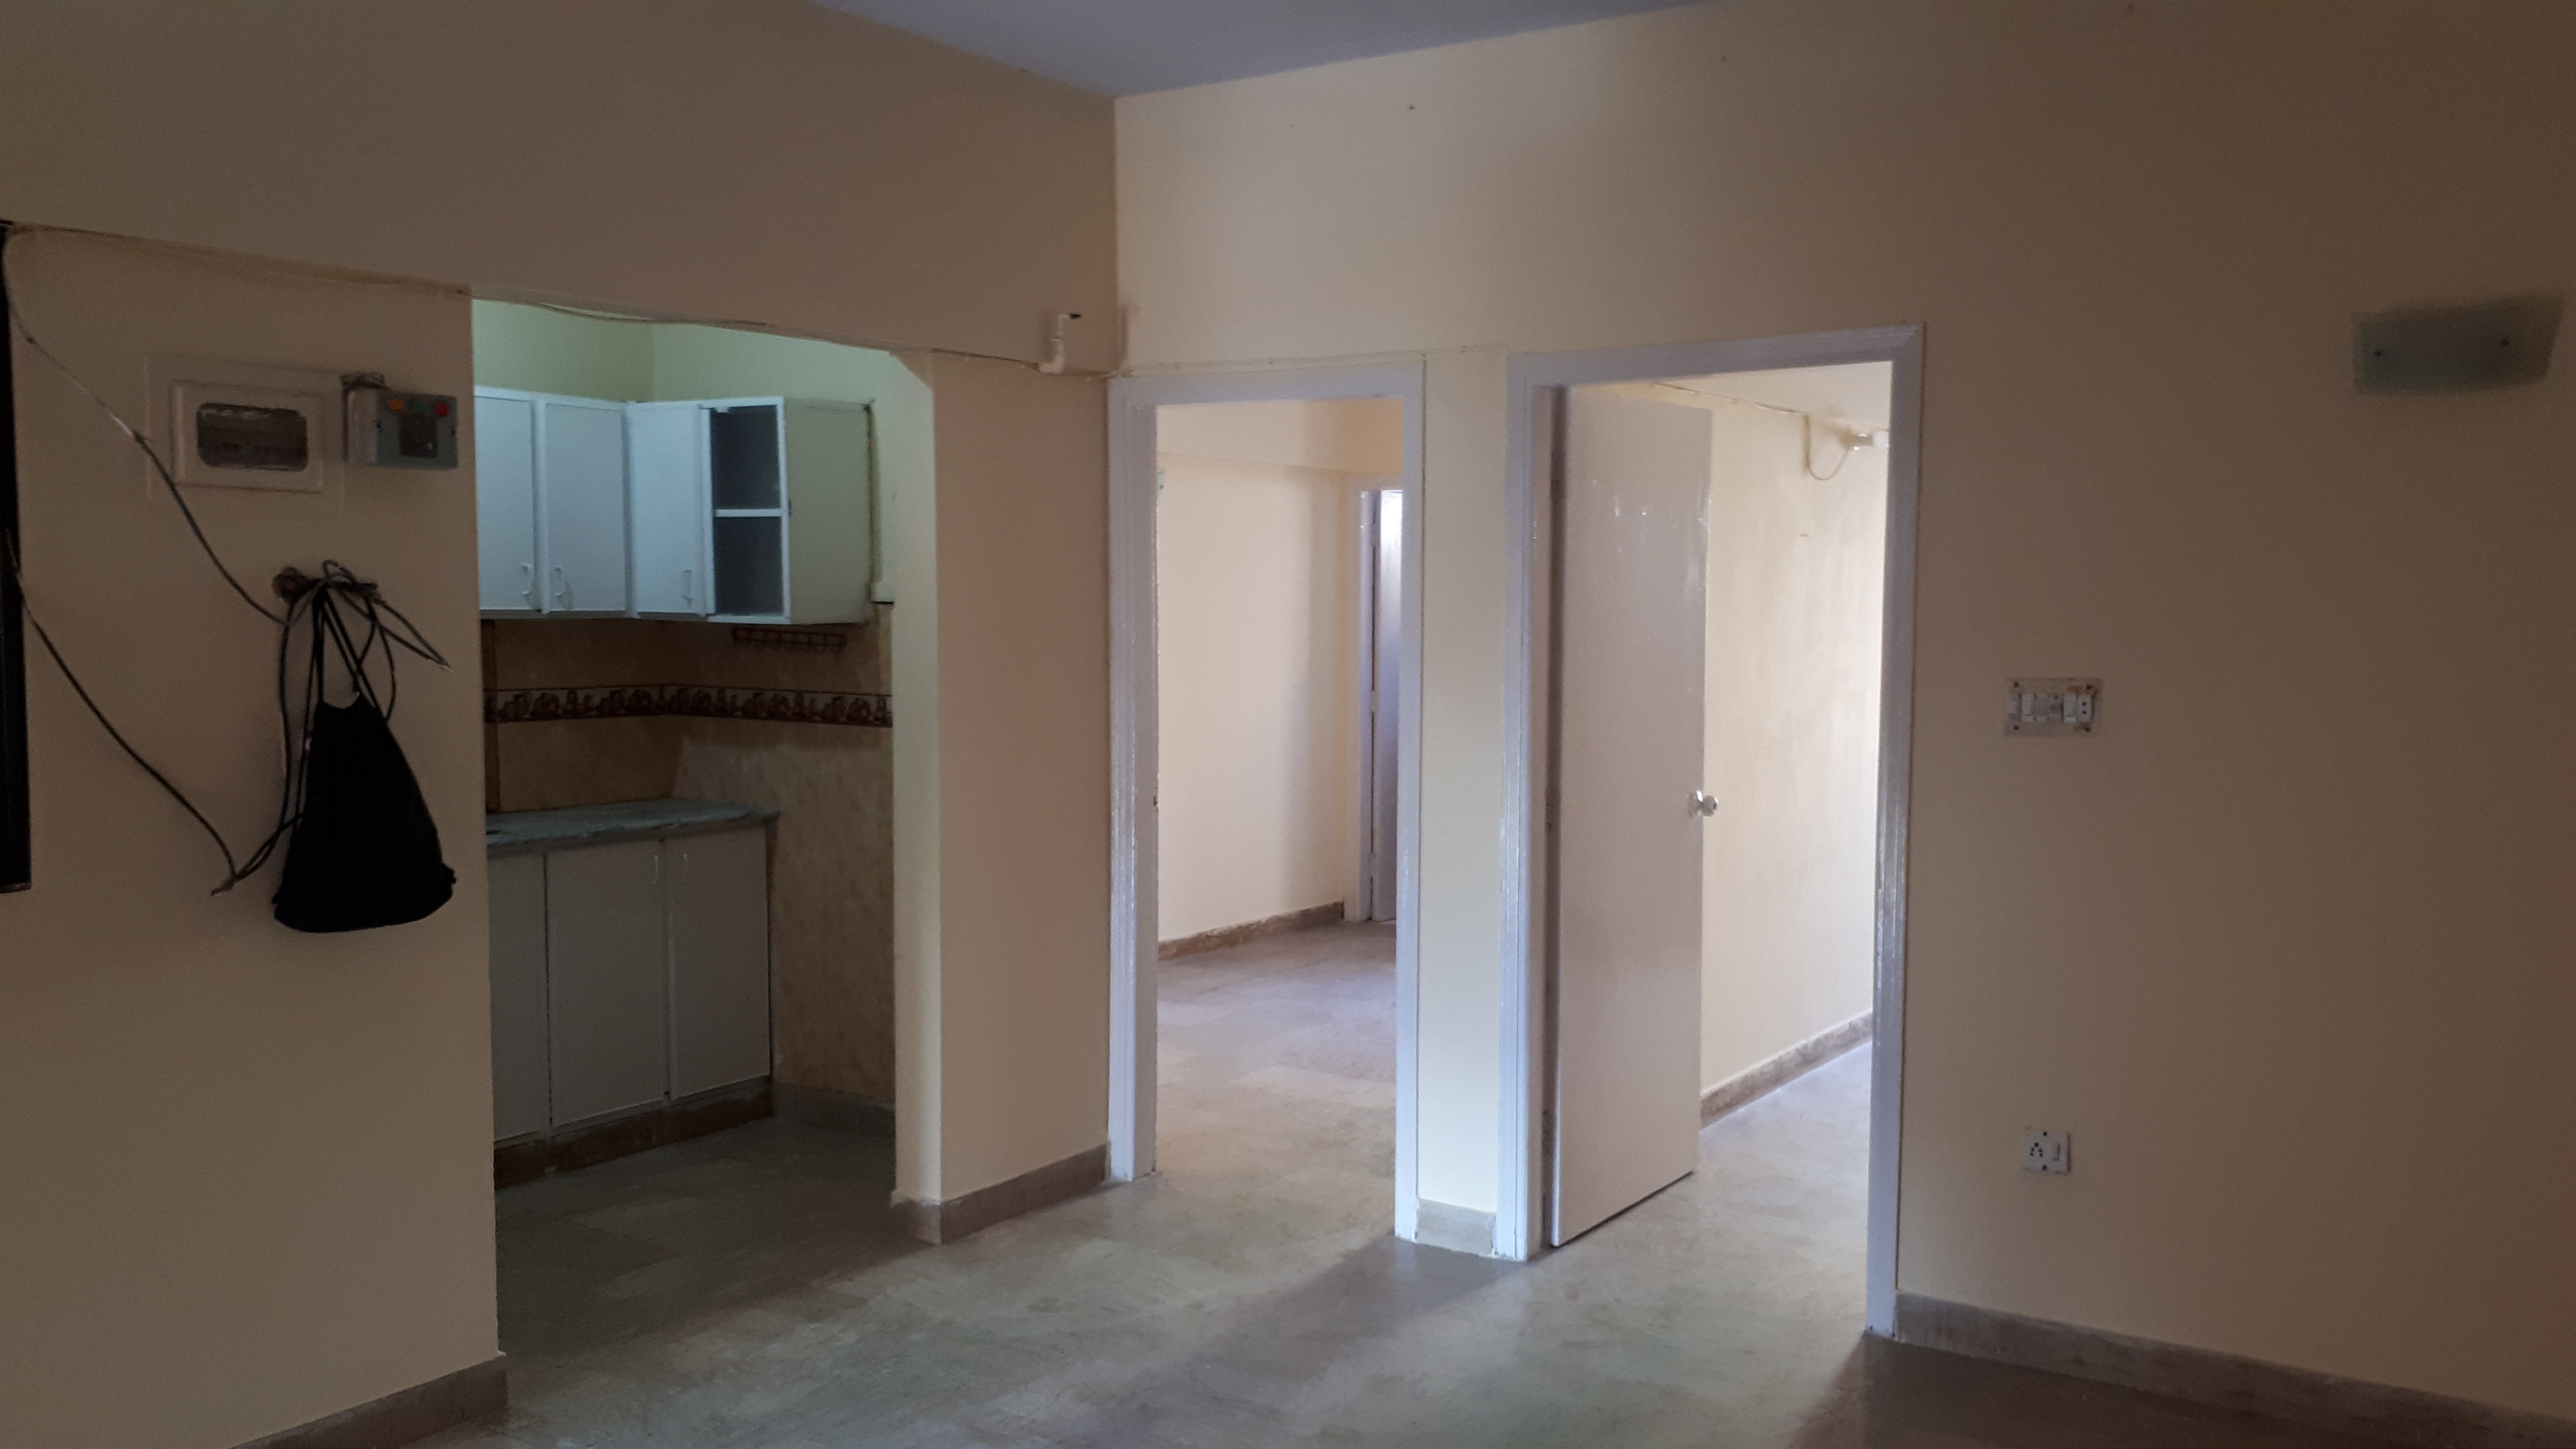 Defence phase 5 delton khadda 2 bed attach bathrooms lounge and kitchen